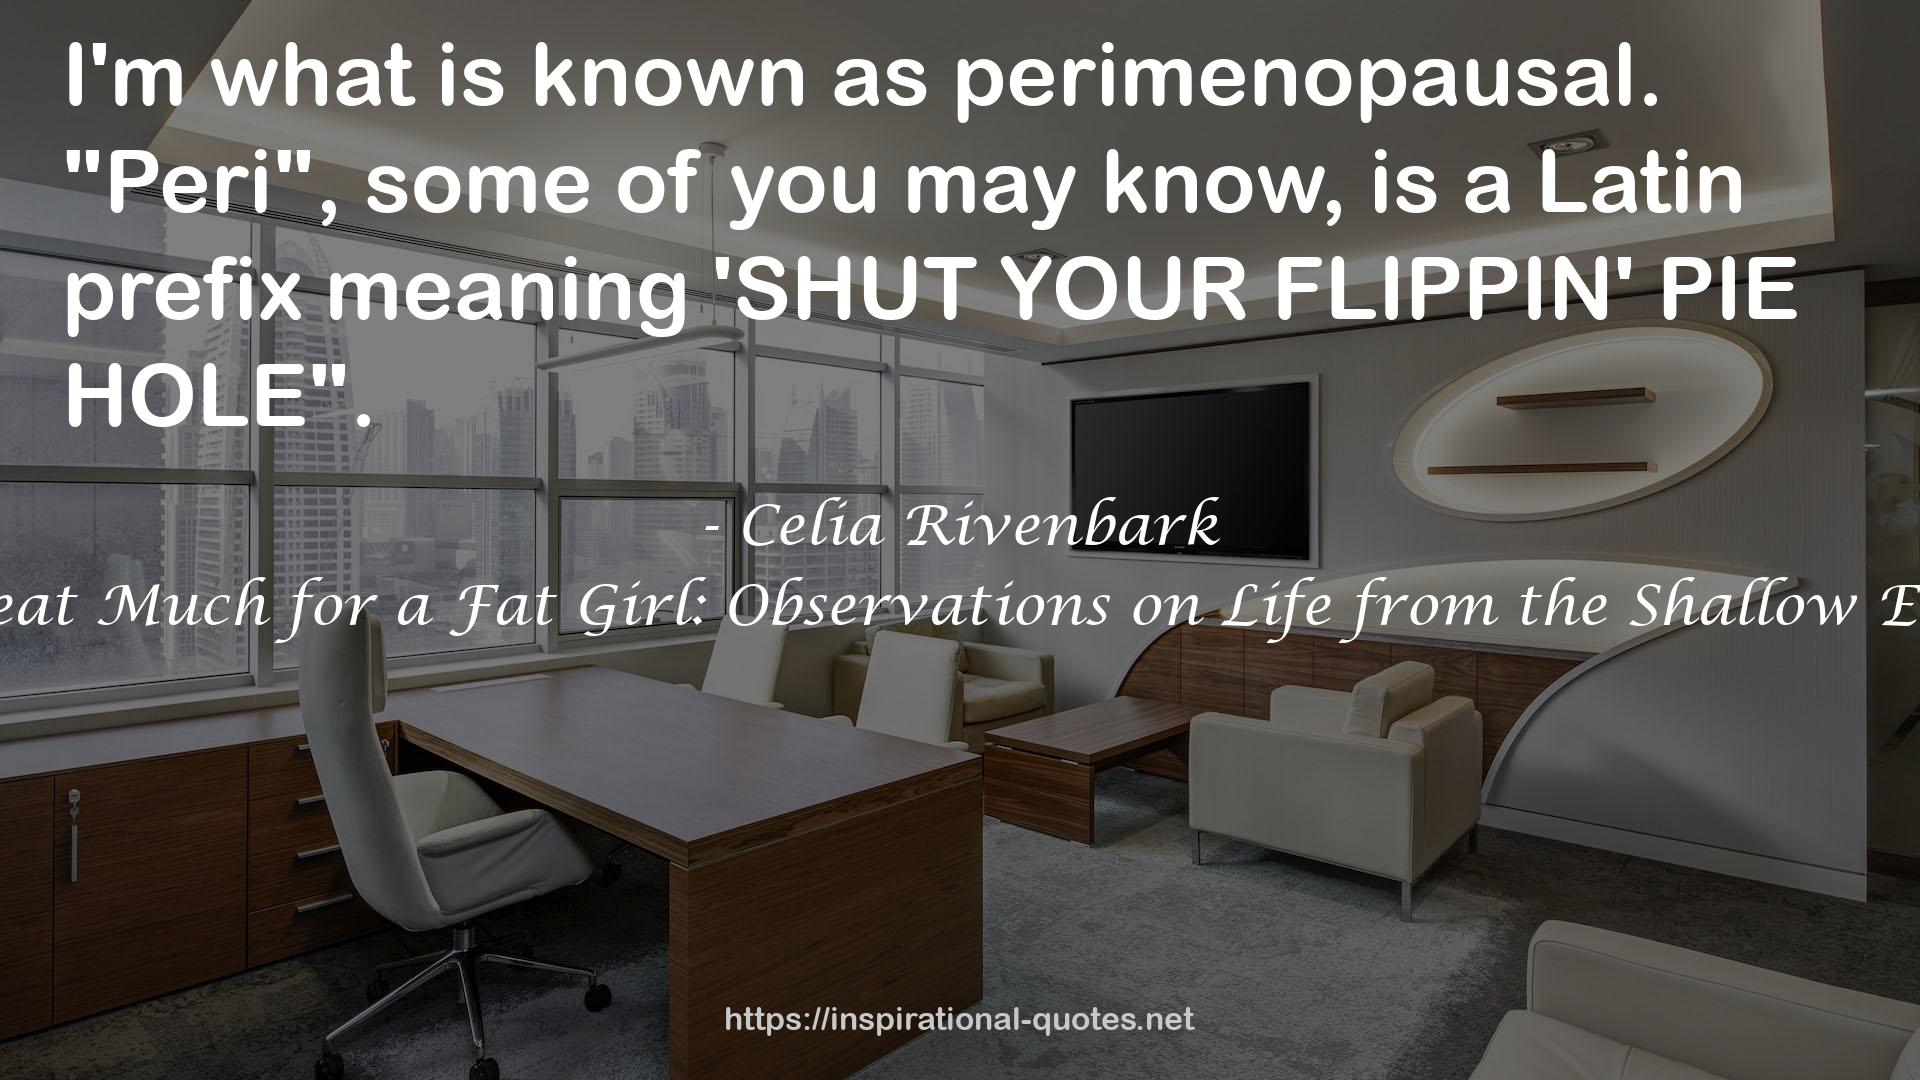 You Don't Sweat Much for a Fat Girl: Observations on Life from the Shallow End of the Pool QUOTES